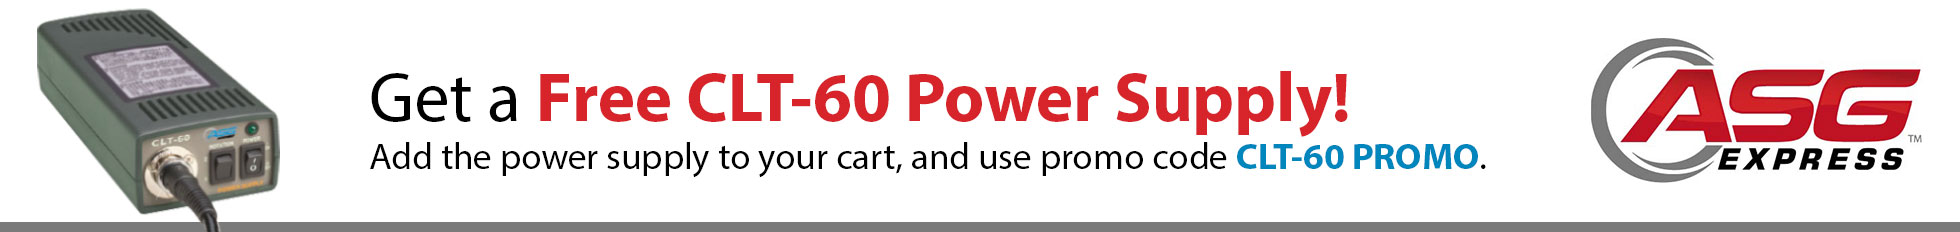 Get a free CLT-60 Power Supply when you buy this ASG Torque Driver